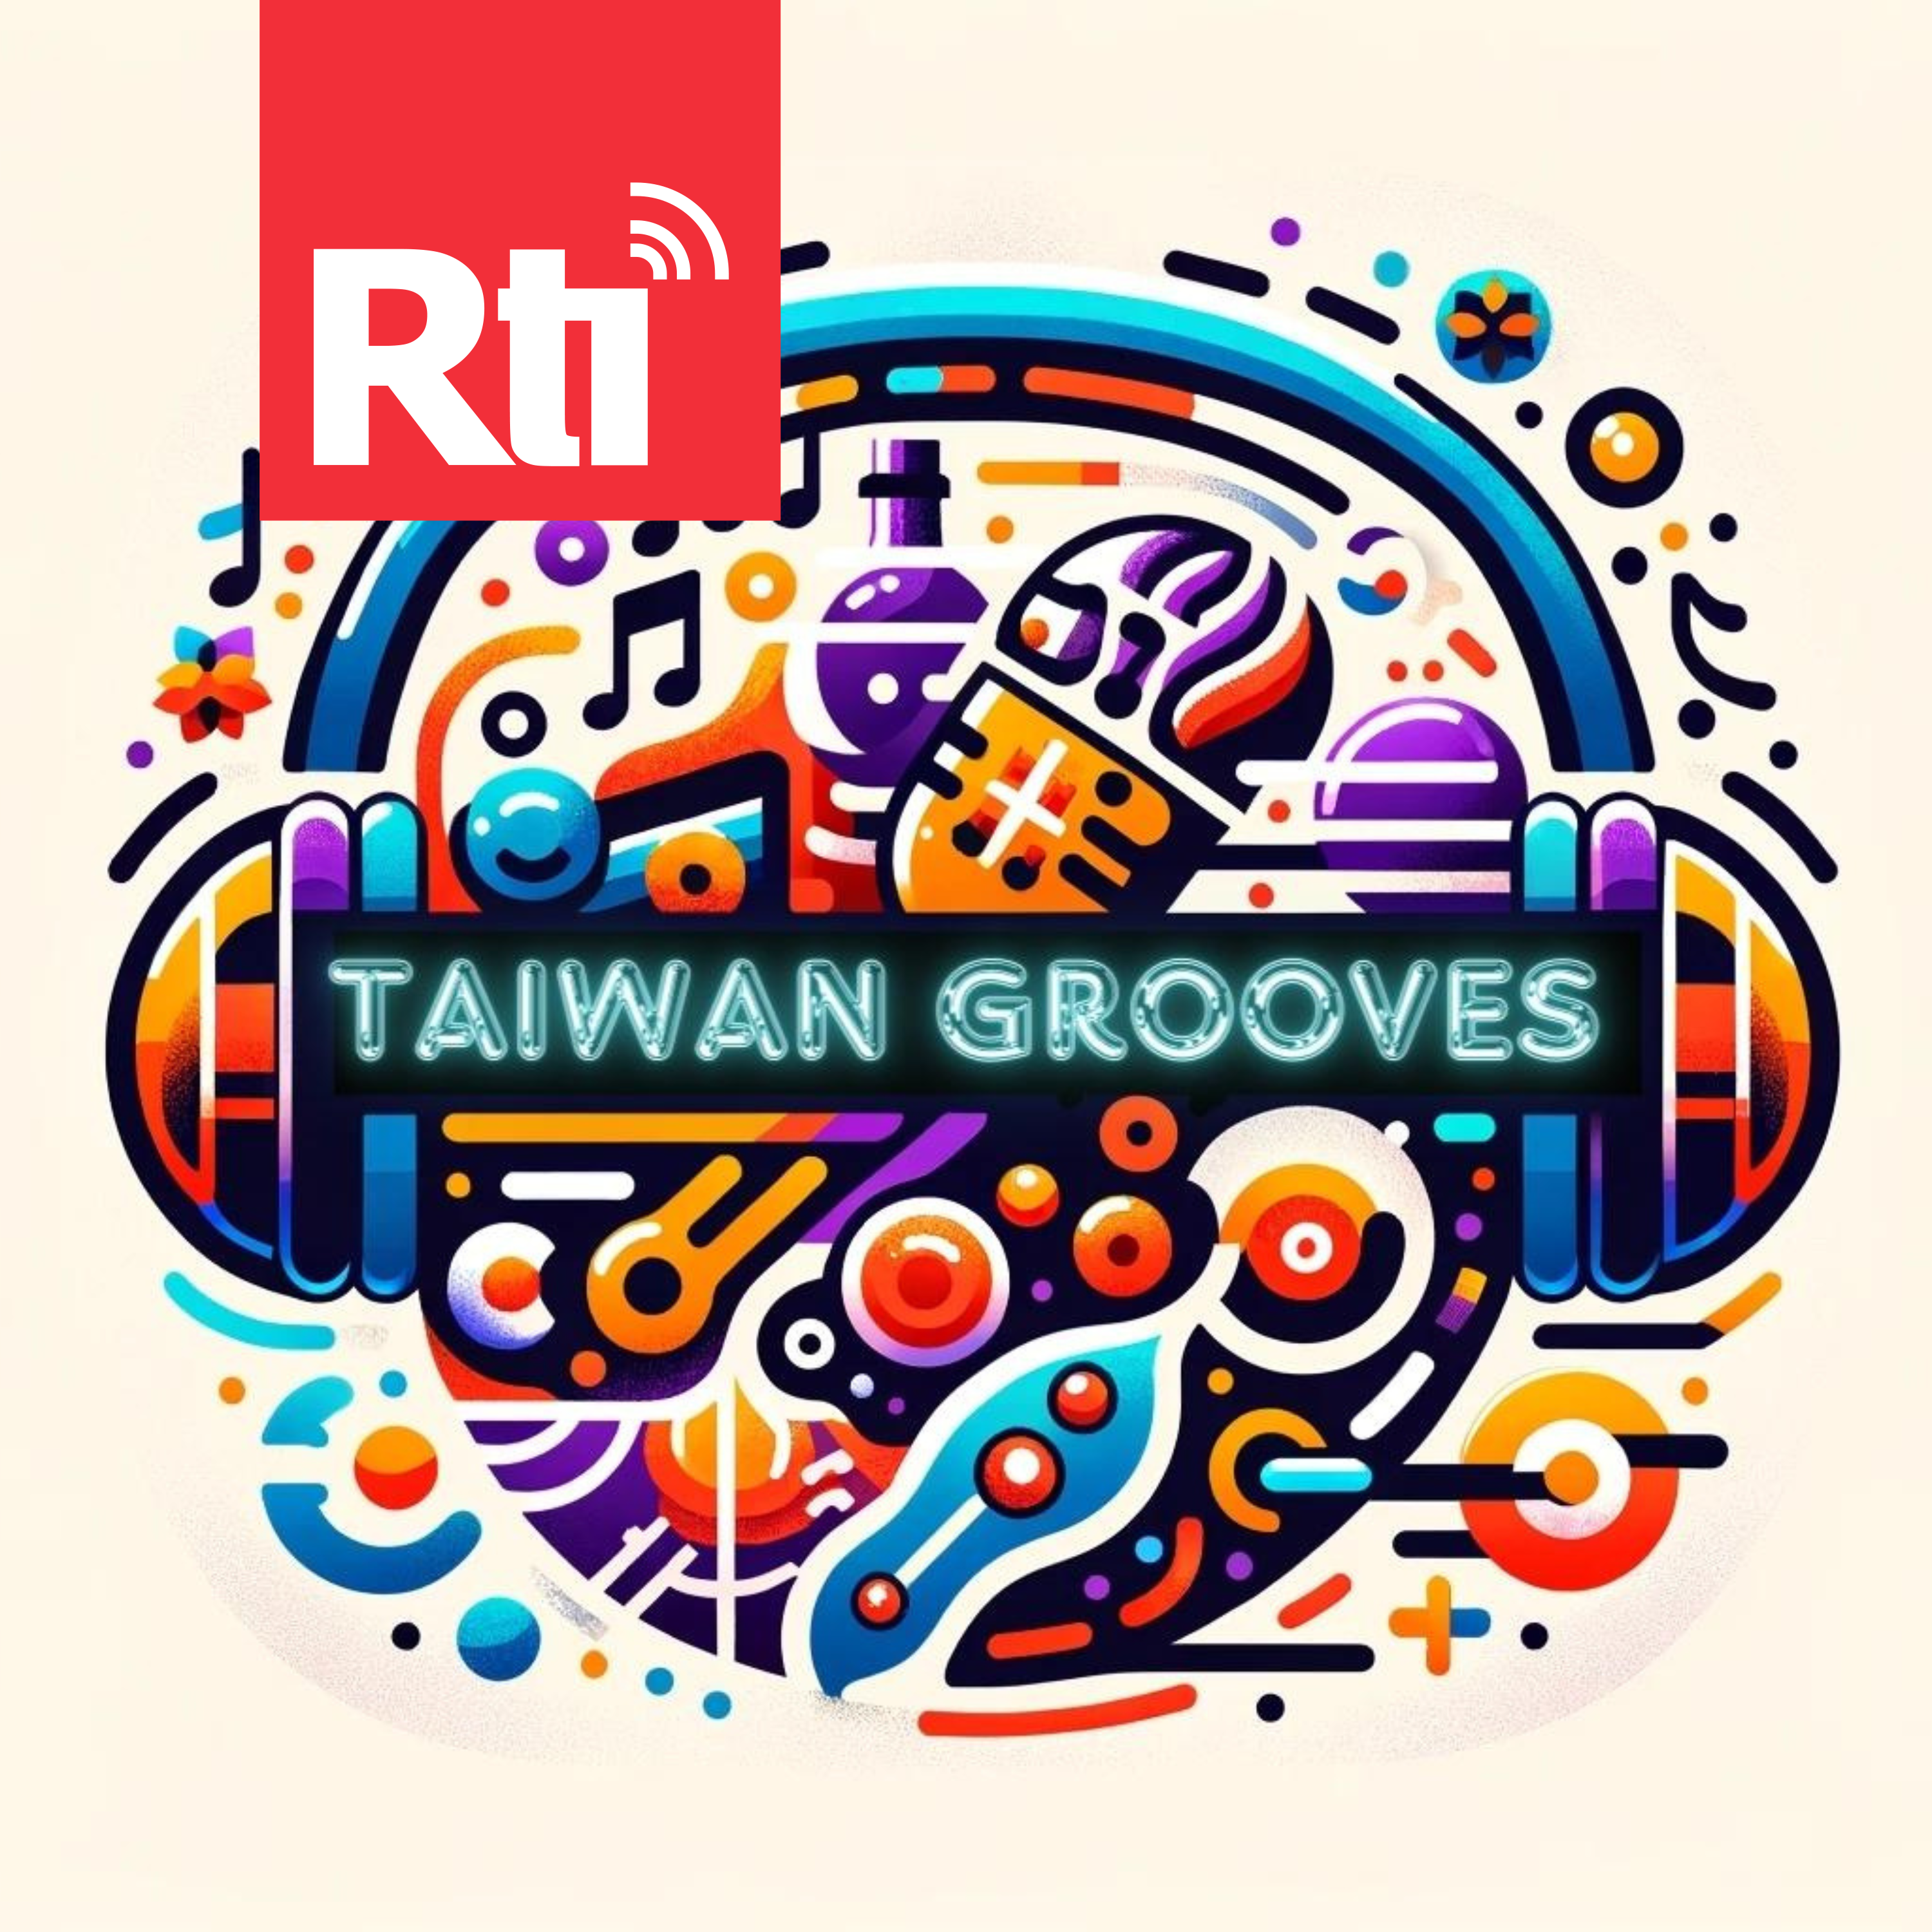 Taiwan Grooves